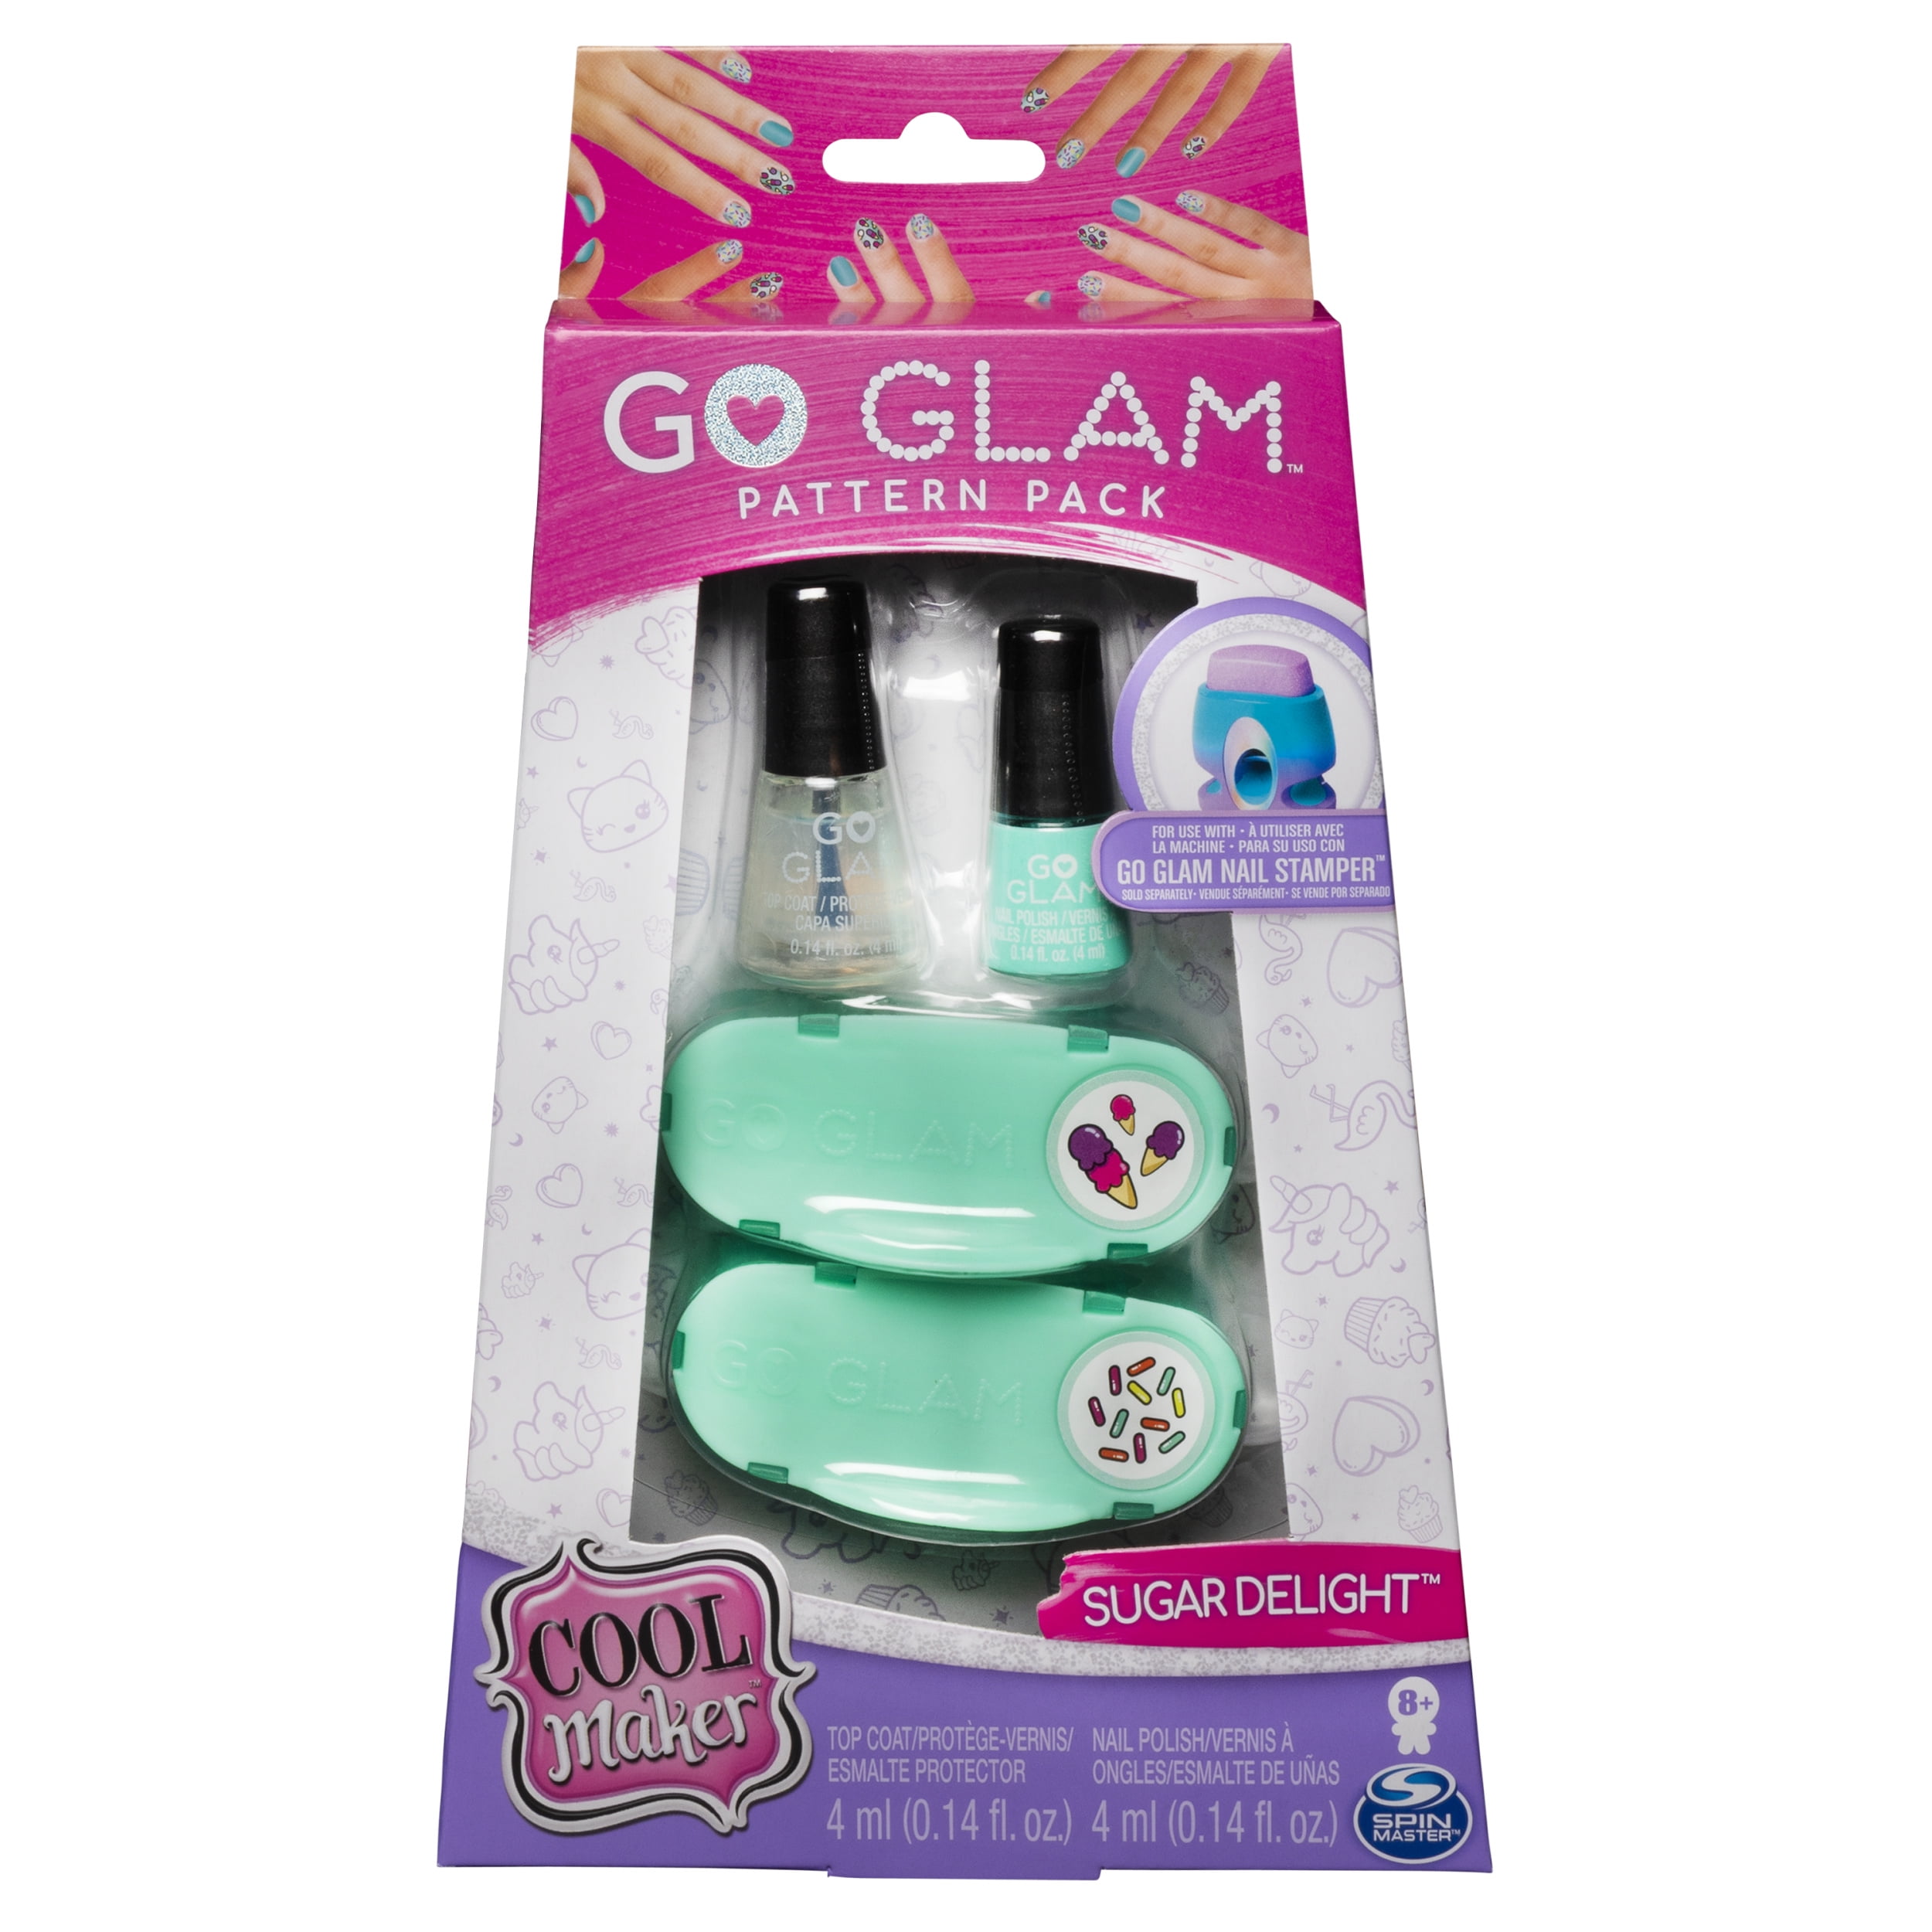 Cool Maker GO GLAM Sugar Delight Pattern Pack Refill Decorates 50 Nails with GO GLAM Nail Stamper 31100318 e853 4622 b8f2 c9e57a0014f2 1.446feb654b2babe154fbcd71d582a2c4